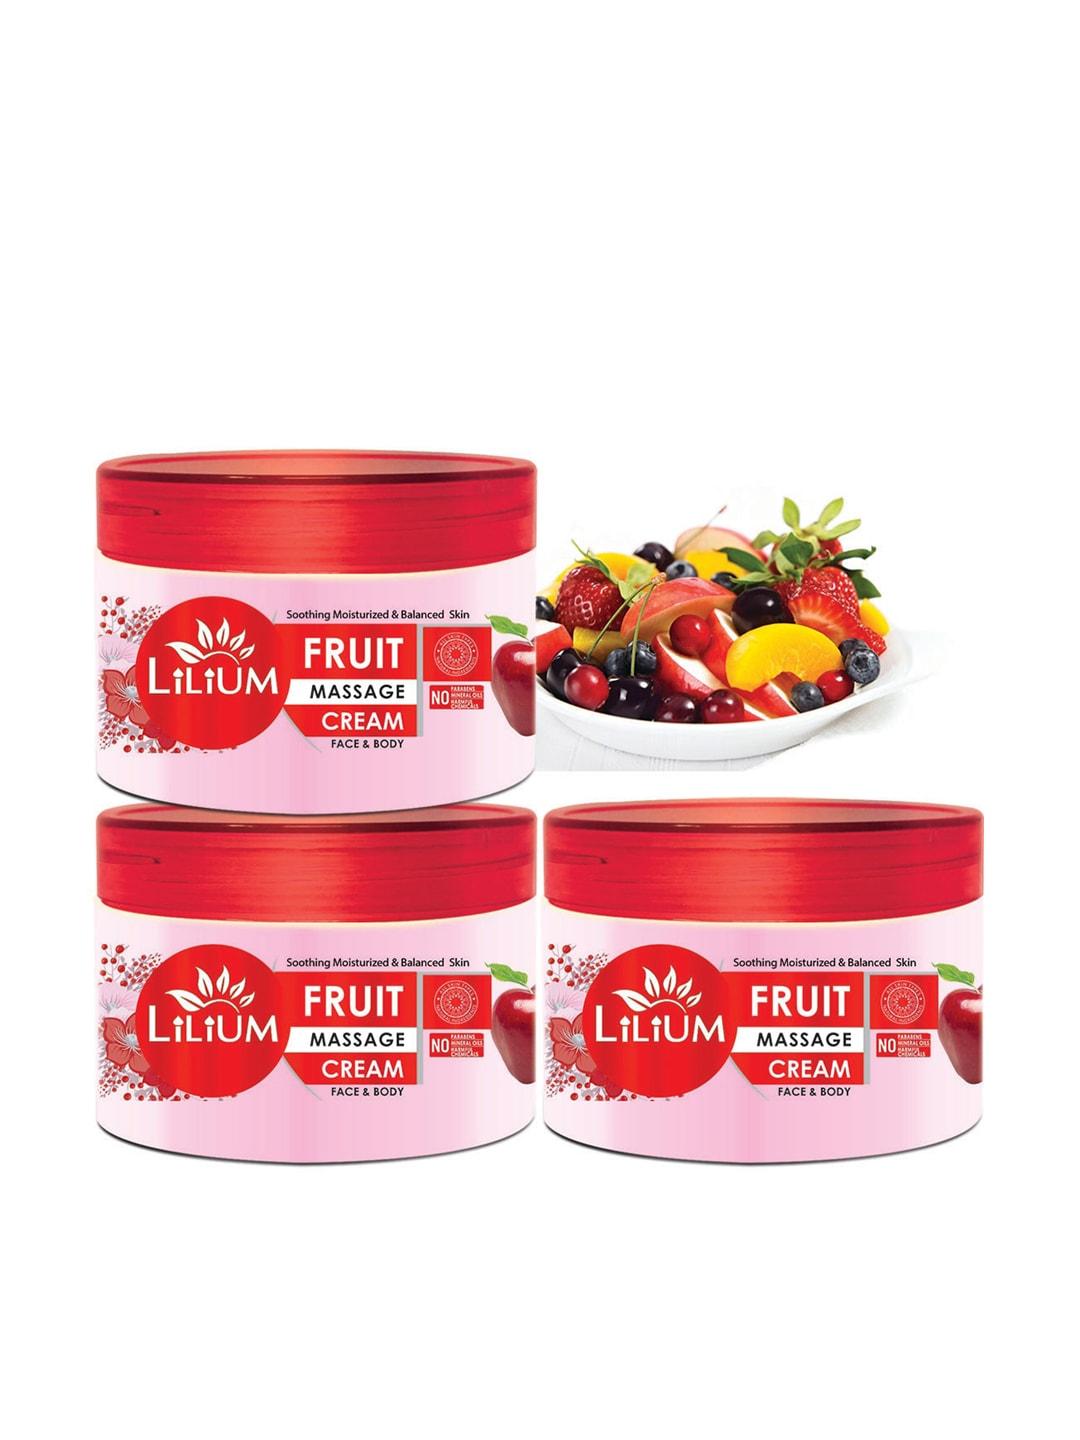 Lilium Set Of 3 Massage Cream With Fruit For Anti Wrinkle-250 Gm Each